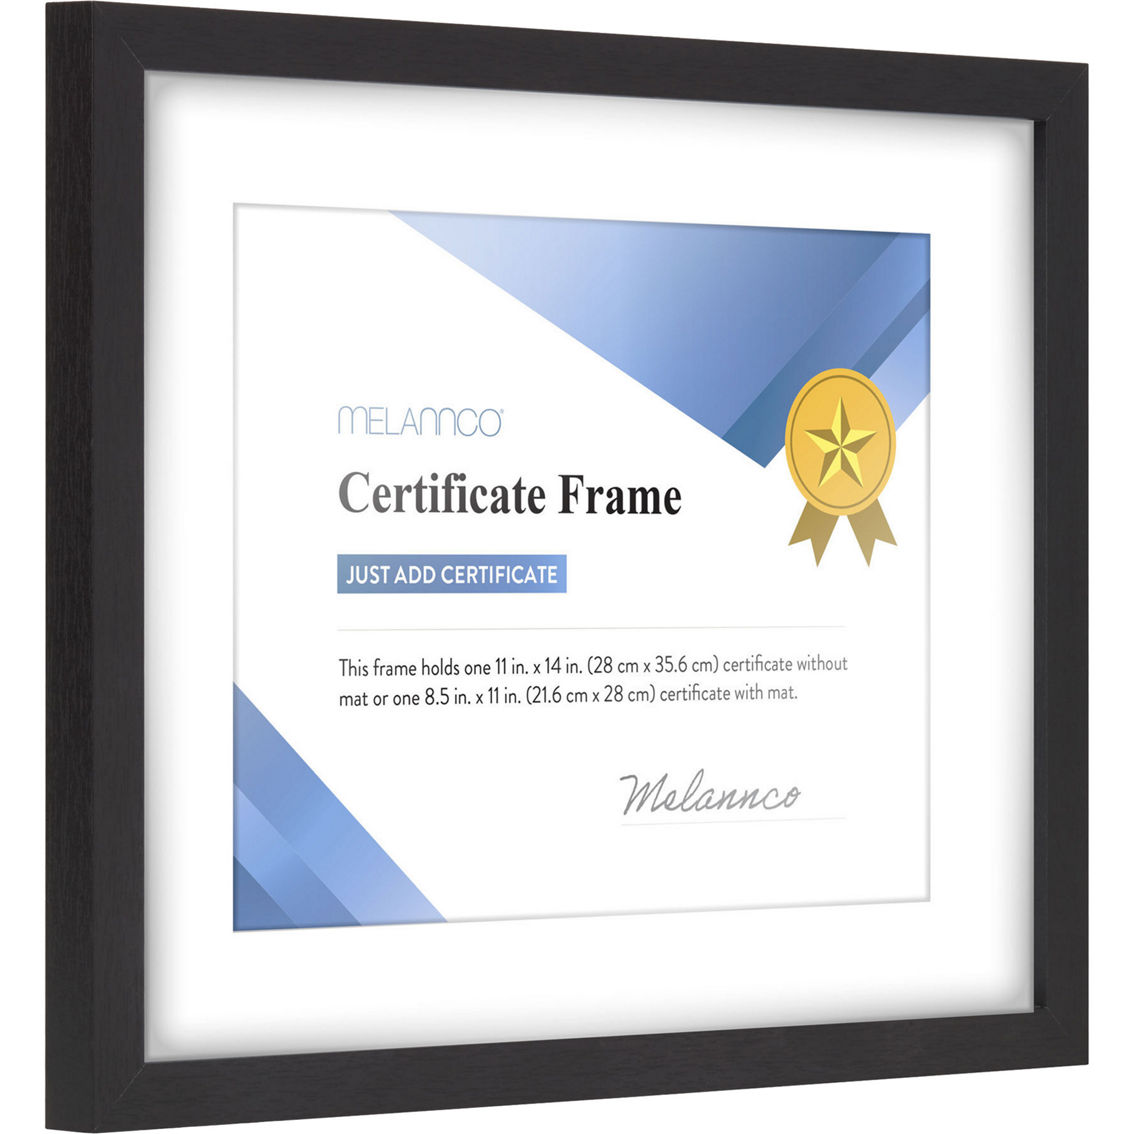 Melannco 8.5 x 11 in. Certificate Black Matted Wood Frame - Image 2 of 4